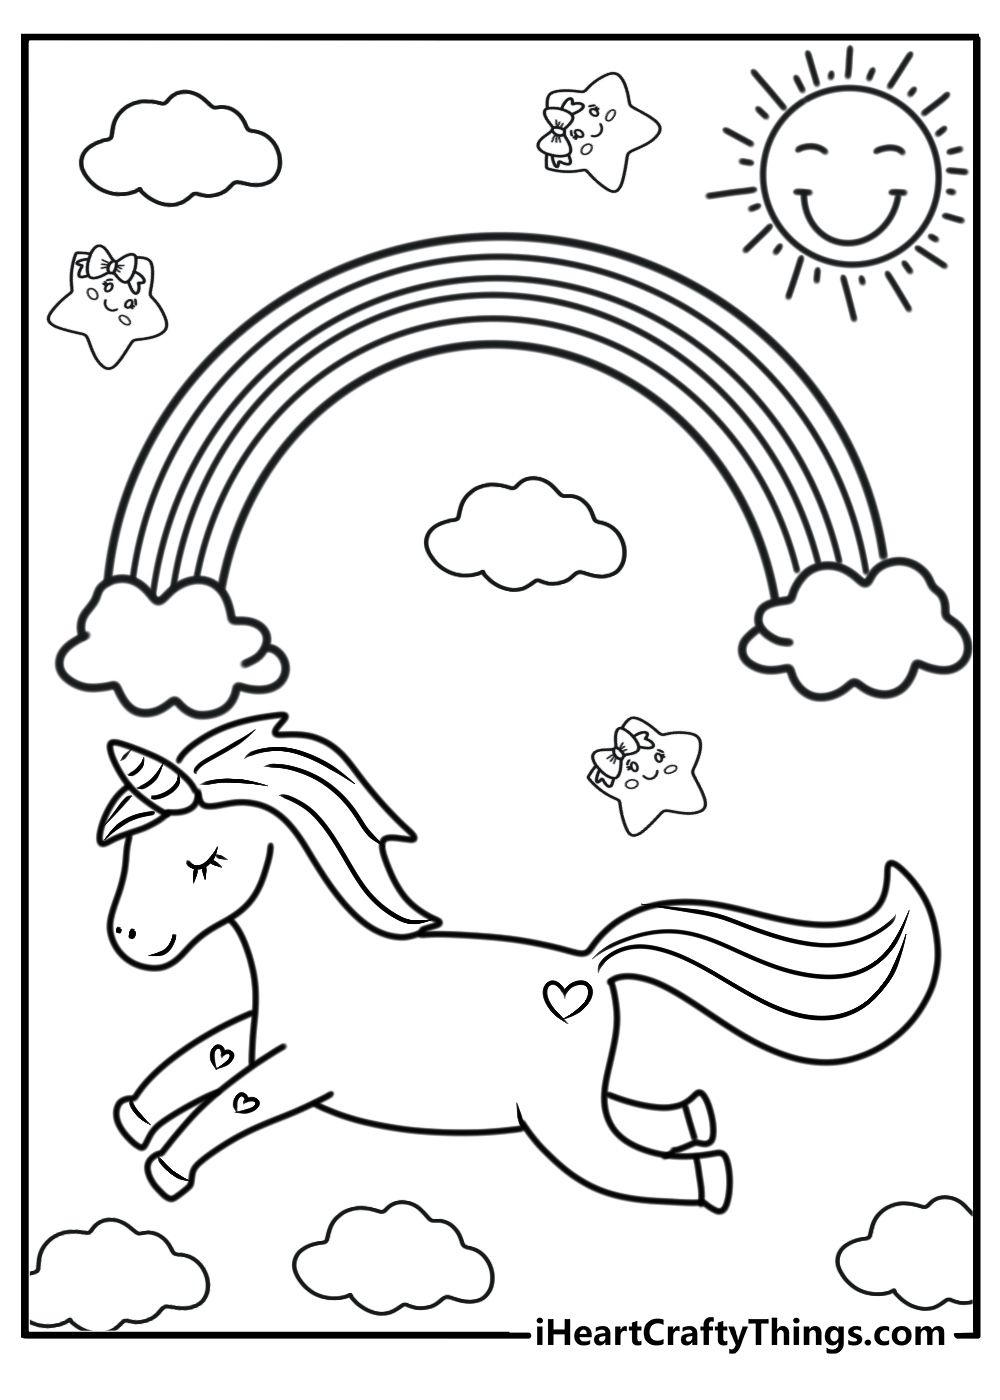 Coloring page of rainbow for toddlers